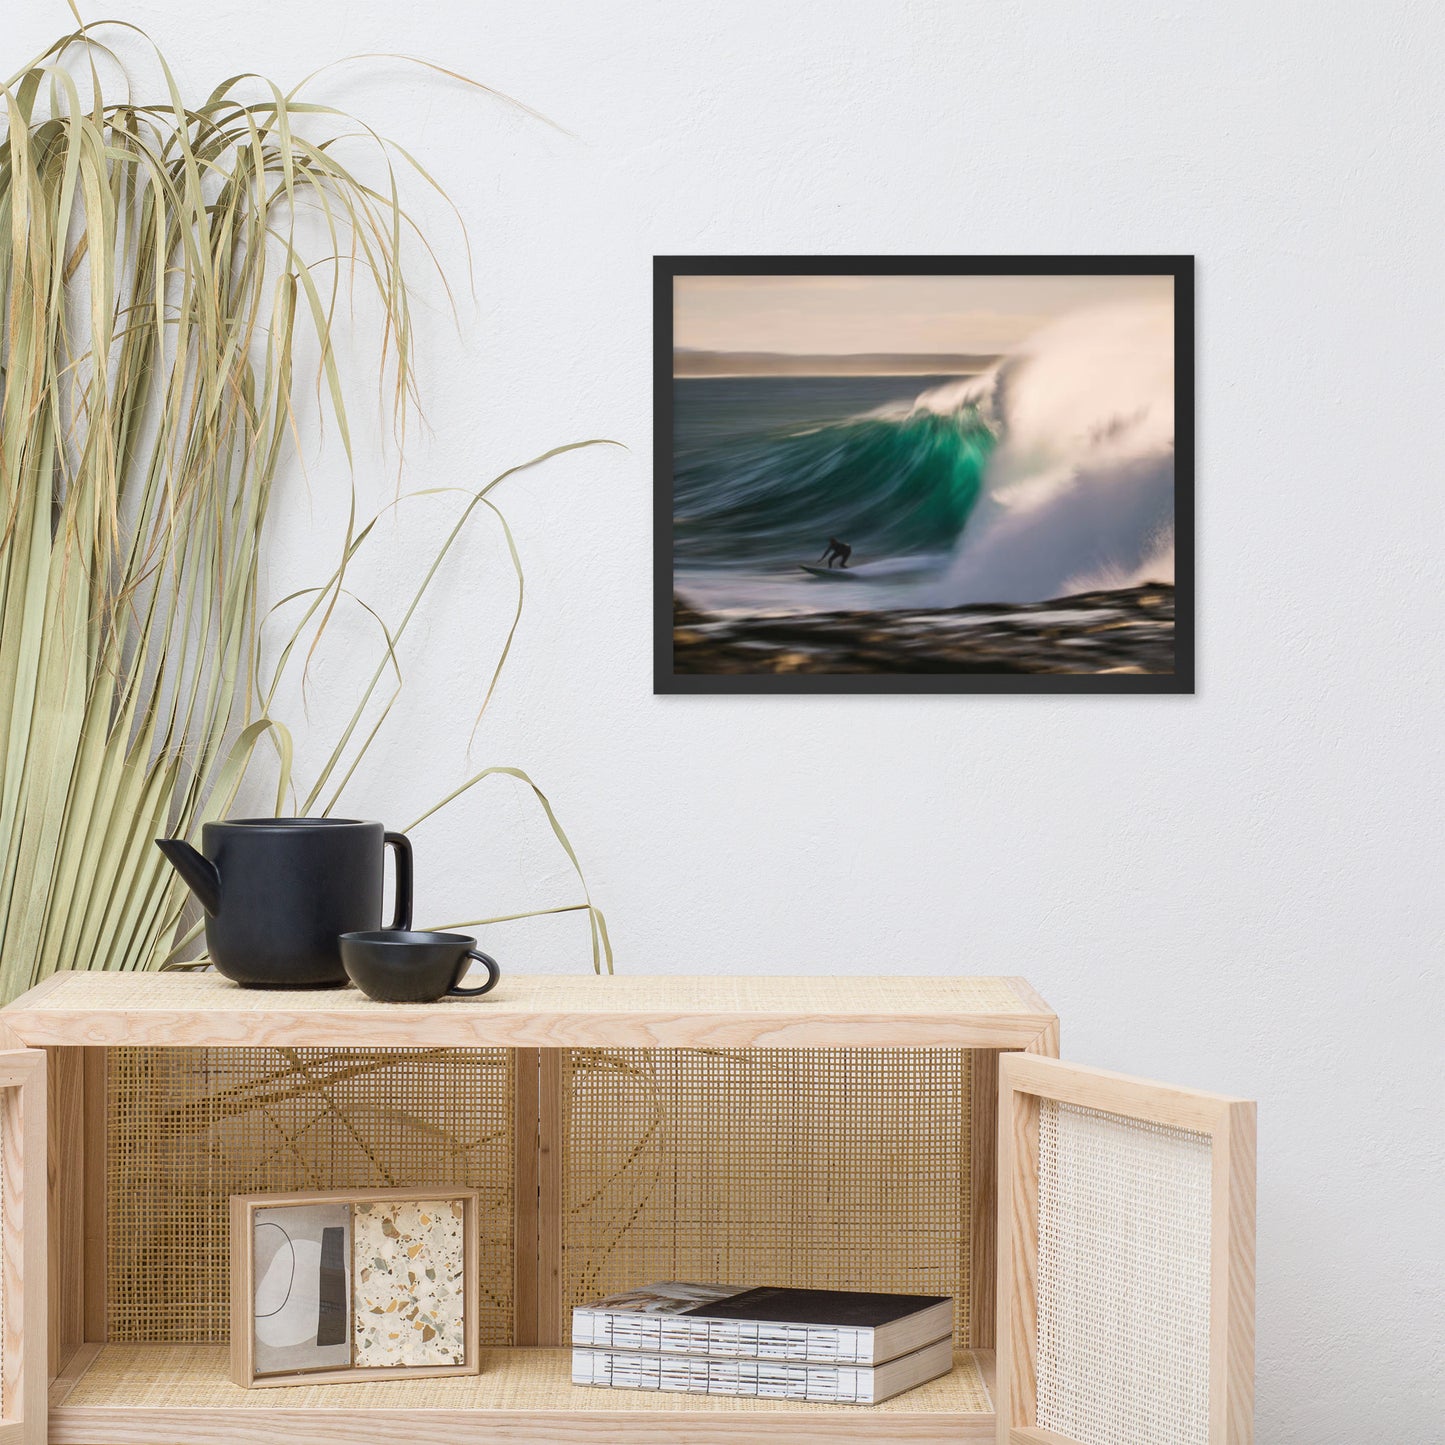 Dance of Water and Light Coastal Lifestyle / Abstract / Landscape Photograph Framed Wall Art Print